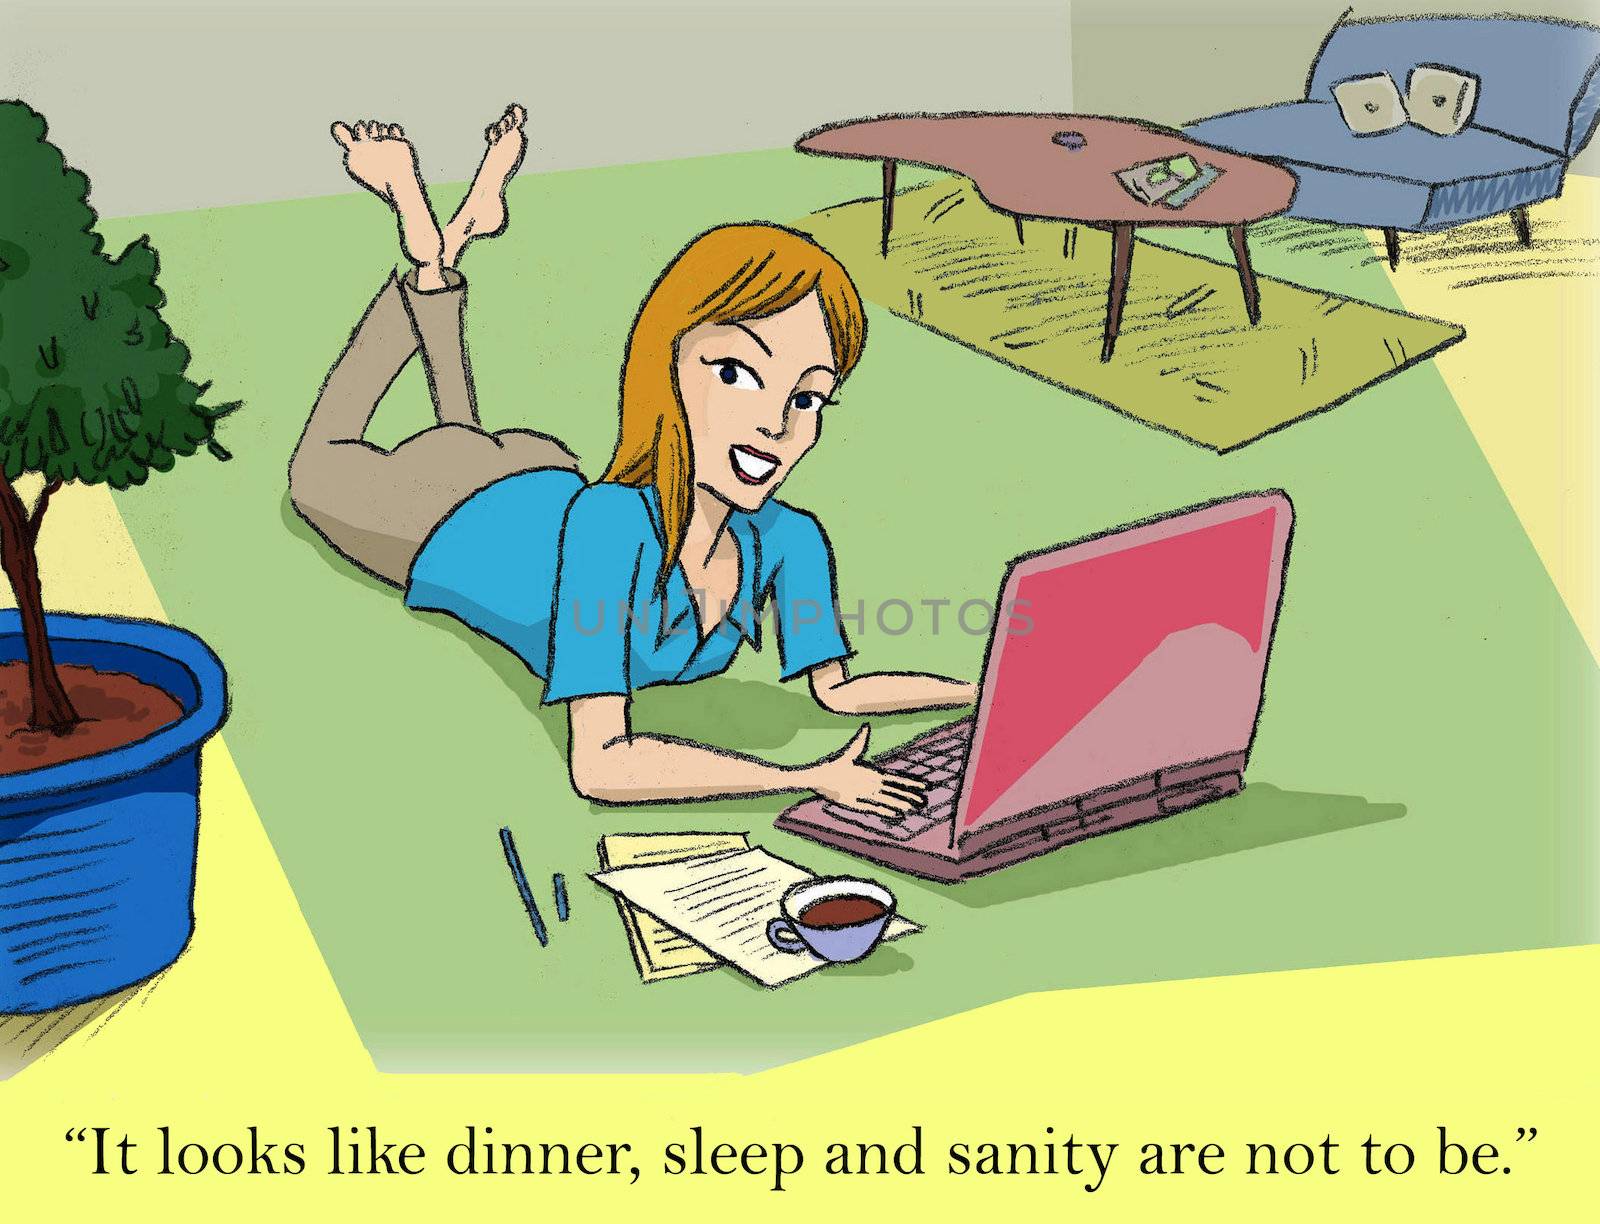 it looks like dinner, sleep and sanity are not to be.